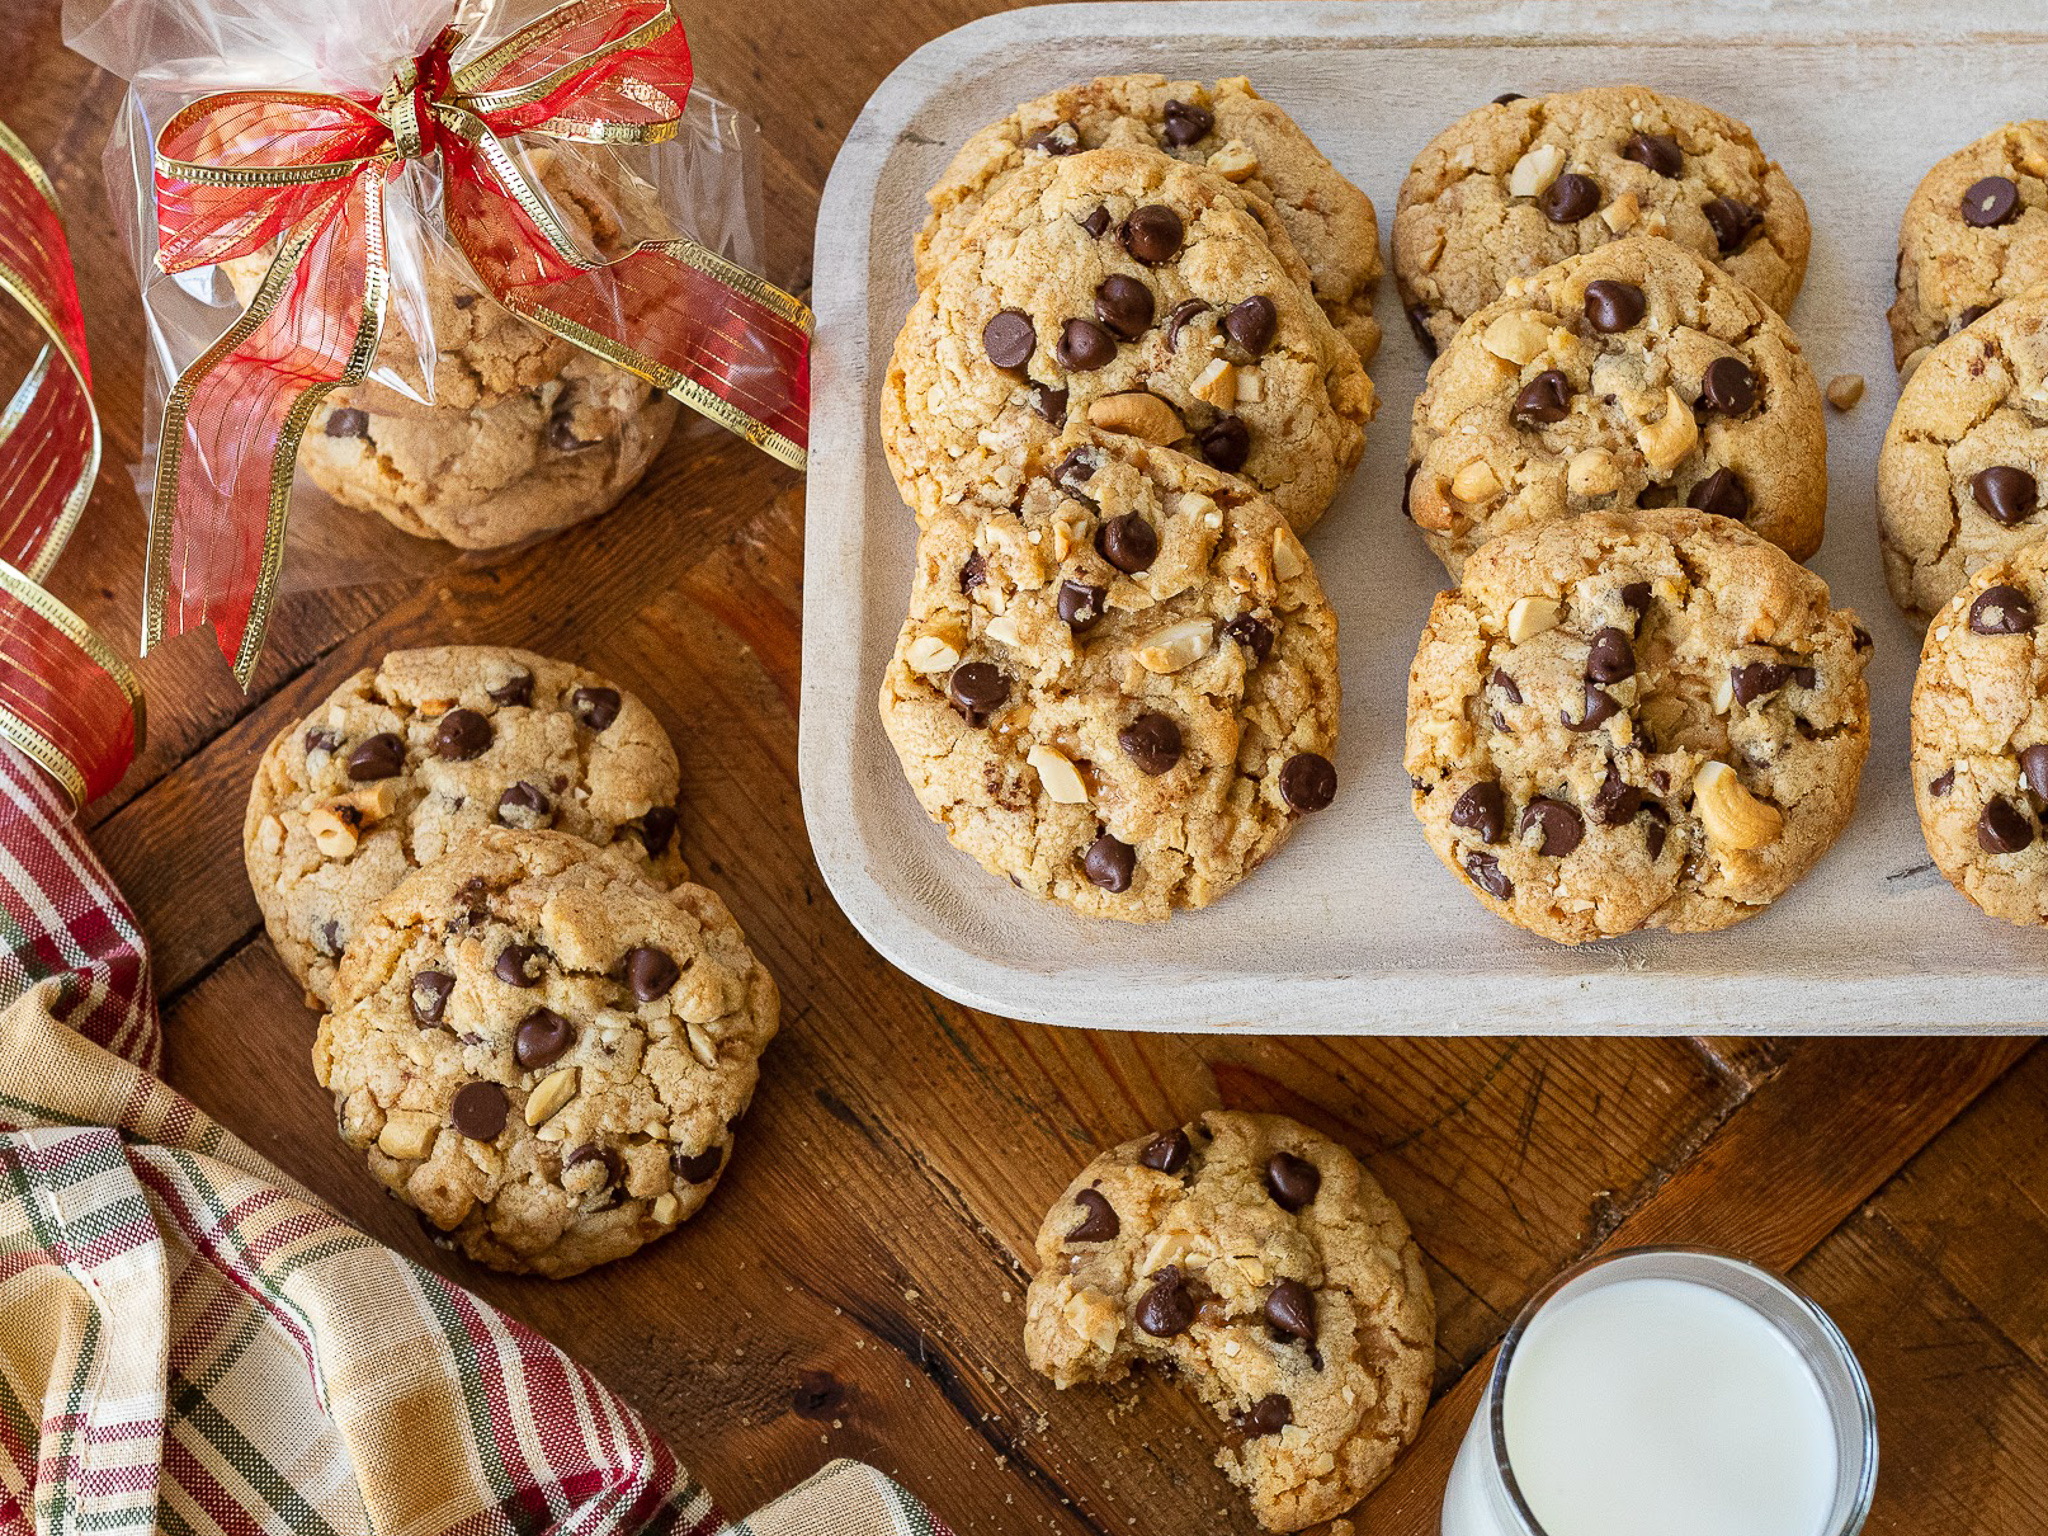 https://www.iheartpublix.com/wp-content/uploads/2022/10/Salted-Toffee-Cashew-Cookies-1.jpg